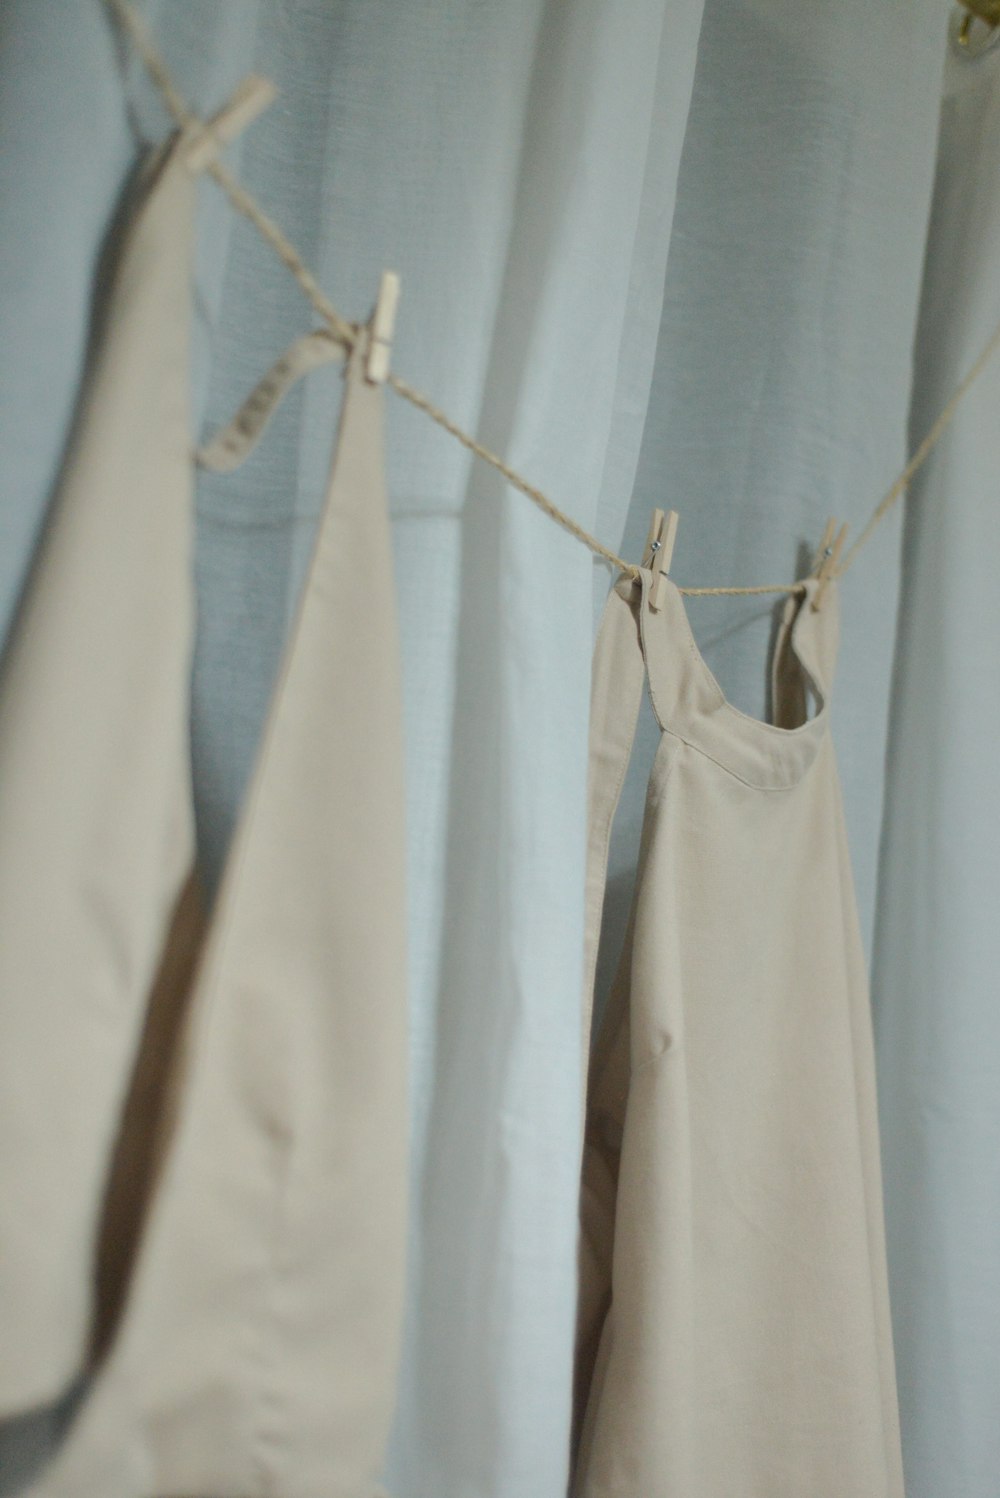 clothes hanging on a clothes line in front of a curtain